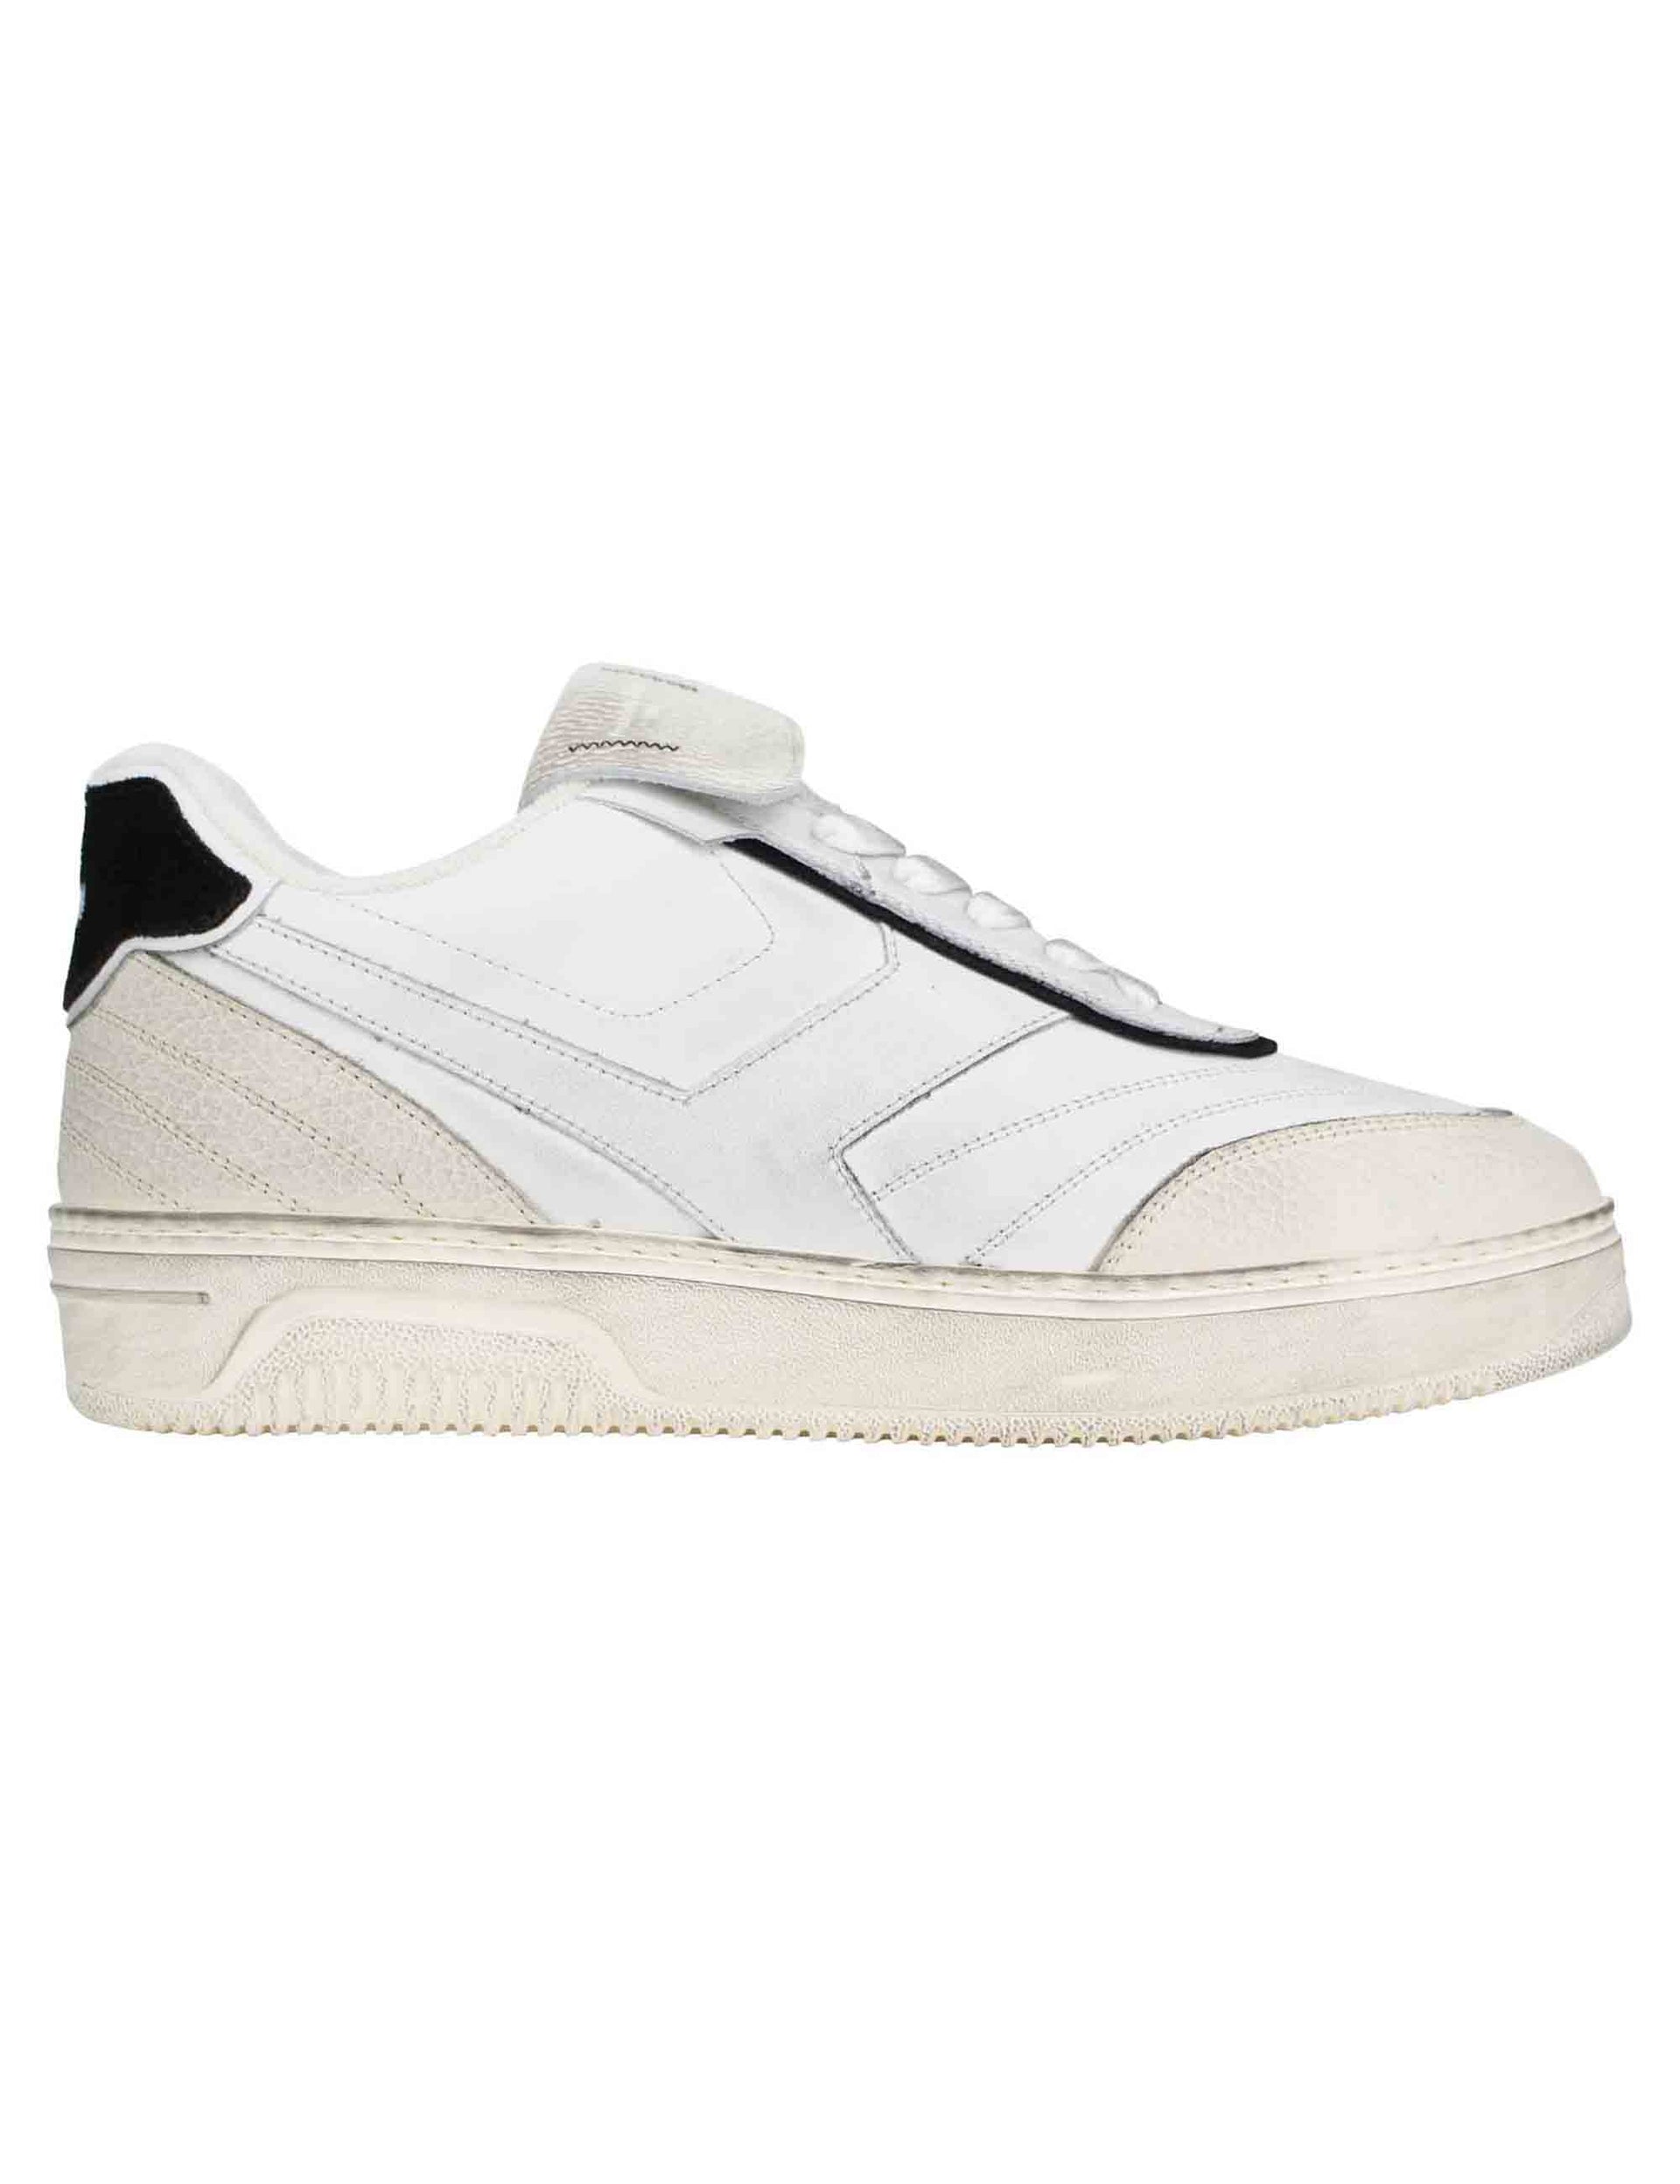 Pdo men's sneakers in vintage white leather